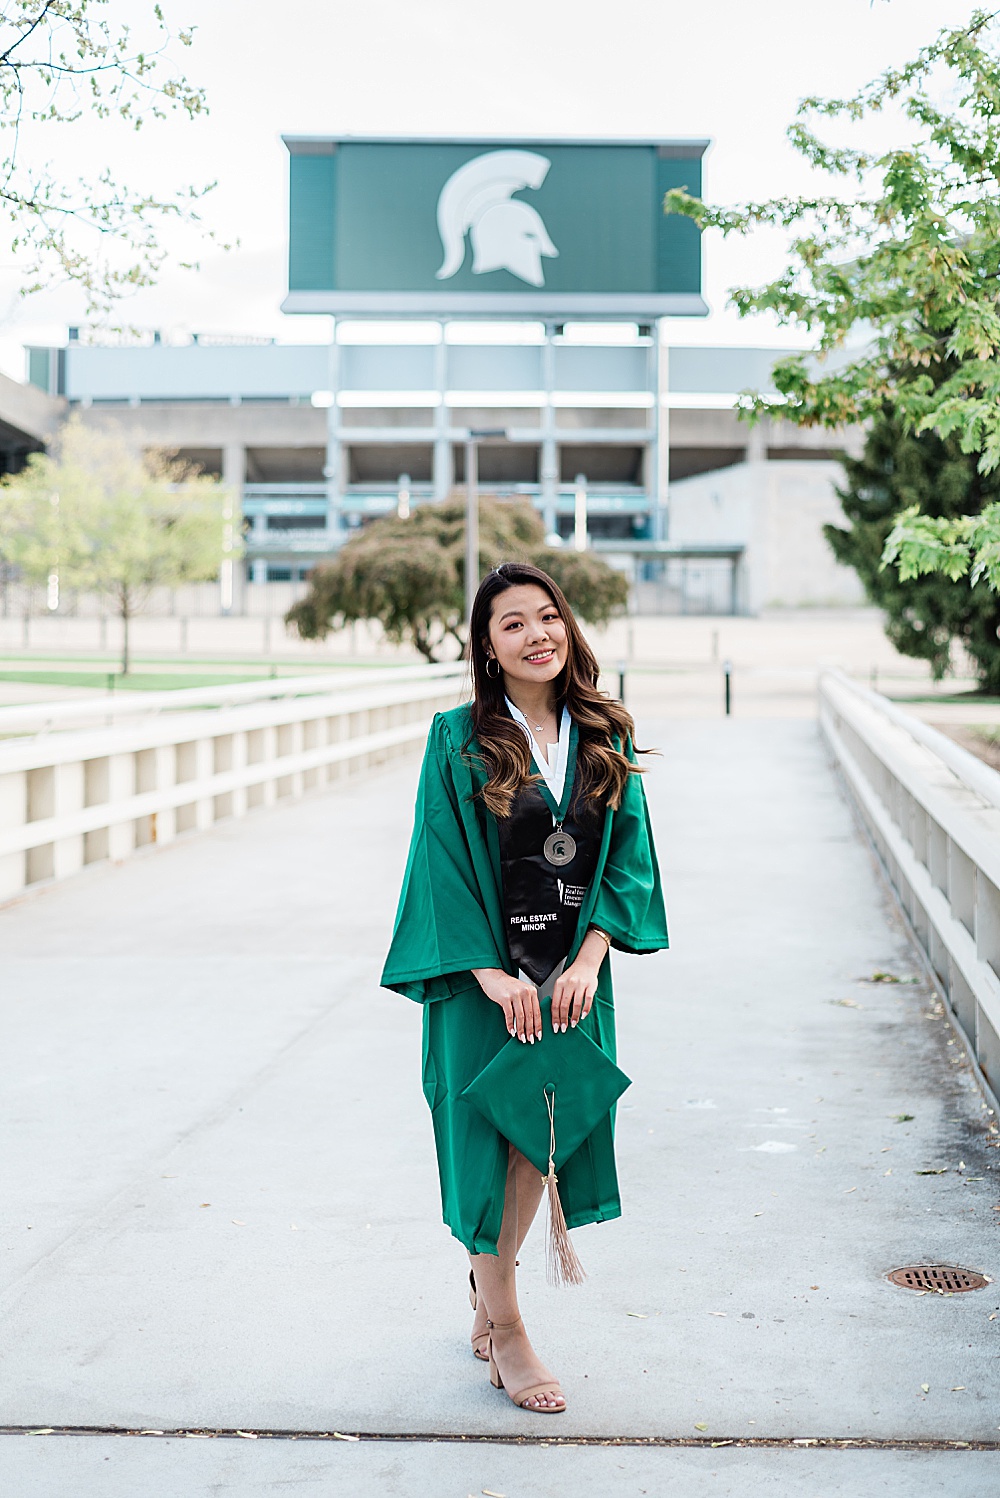 Michigan State Senior grad photoshoot on MSU's campus, photo of a woman in a white dress wearing graduation gown on the bridge by Spartan Stadium, by Allie Siarto & Co., East Lansing photographers